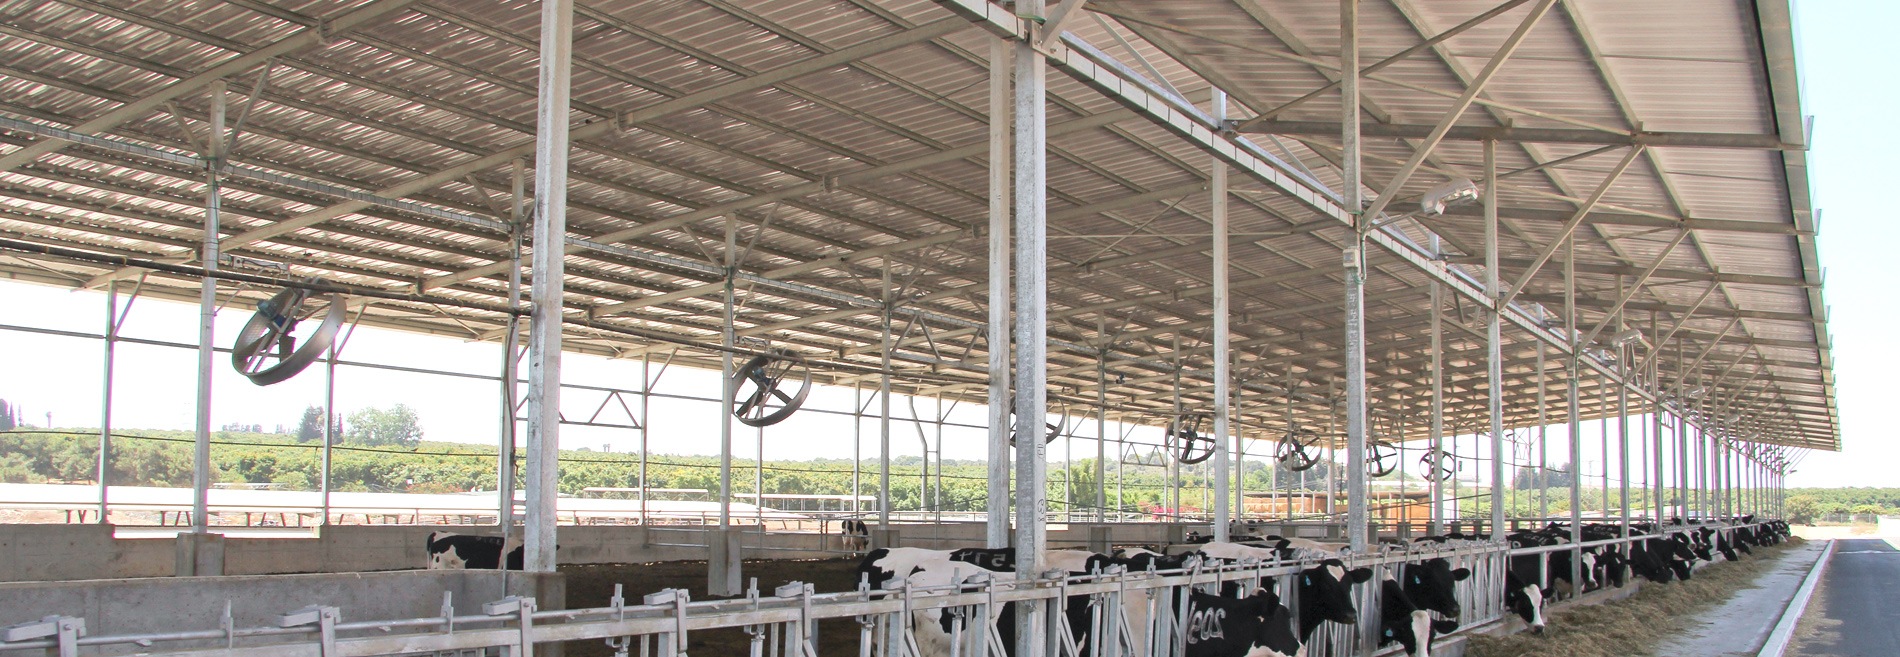 corrugated pvc panel PalRuf being used in cow pen